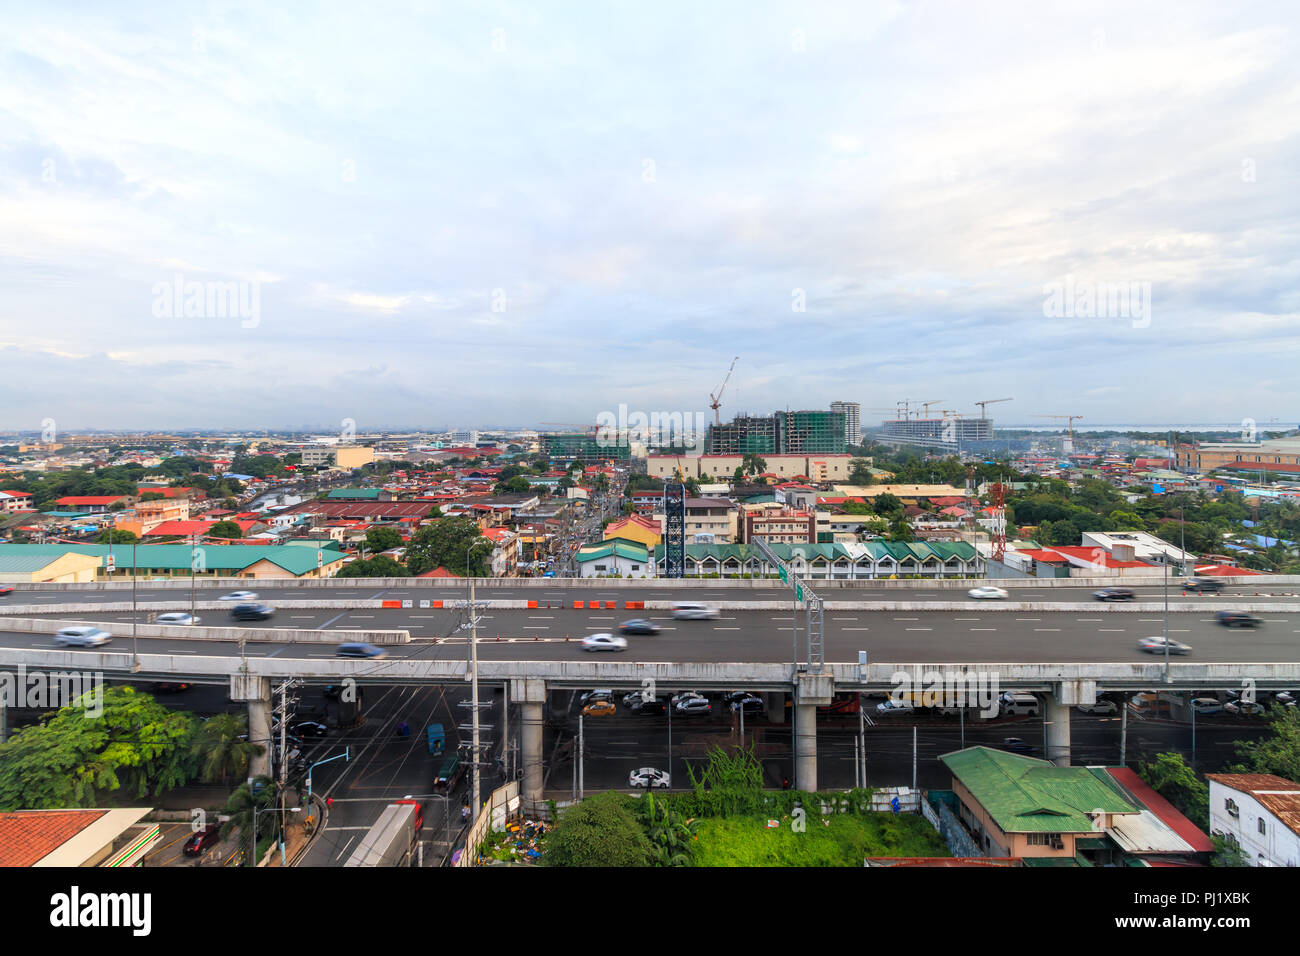 Parañaque, Metro Manila, Philippines - uly 27, 2018: View Of The Highway In Manila Stock Photo